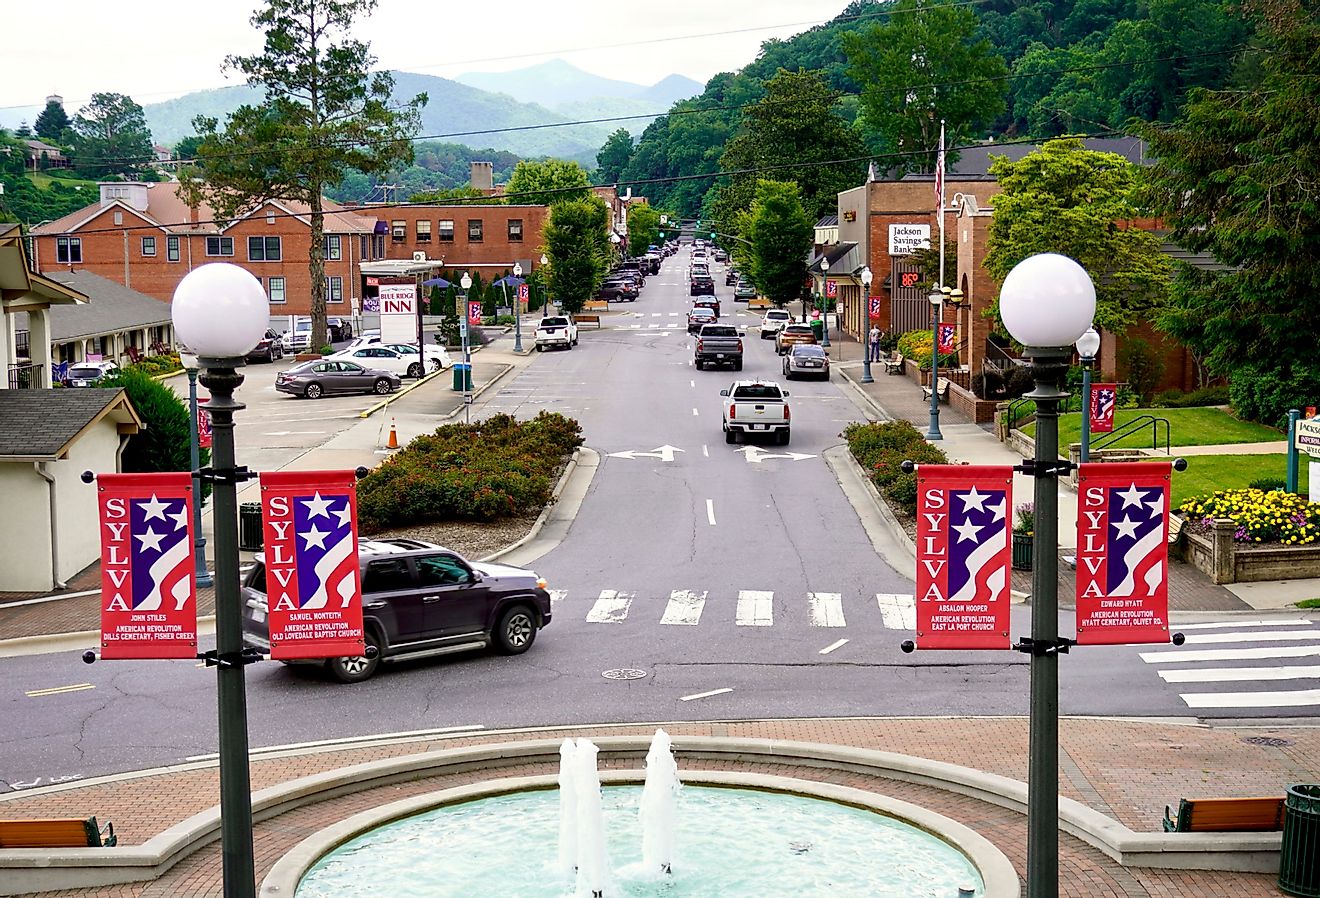 View from historic Courthouse stairs in Sylva, North Carolina. Image credit EWY Media via Shutterstock